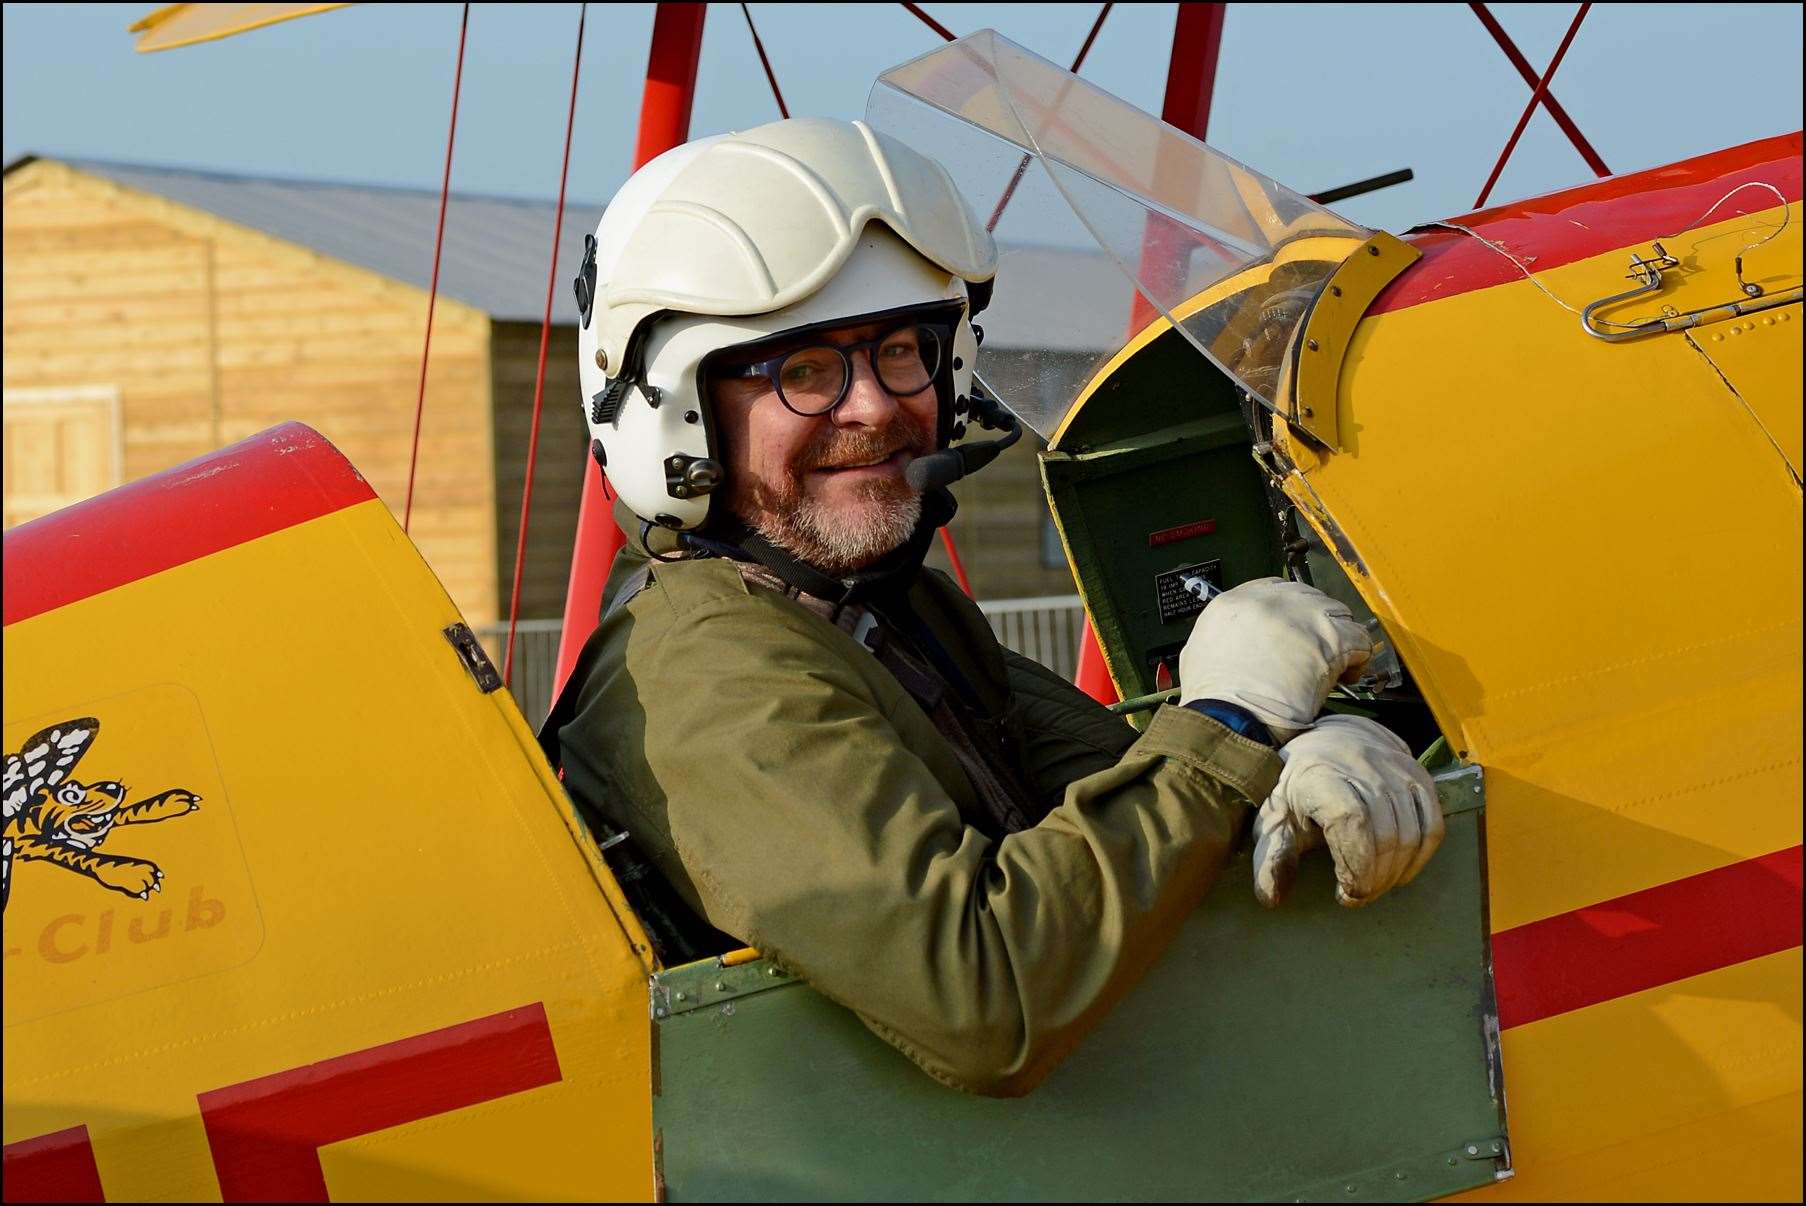 Angus Buchanan died on Sunday, May 9 after a plane he was flying crashed into a field Picture: Stampe formation display team